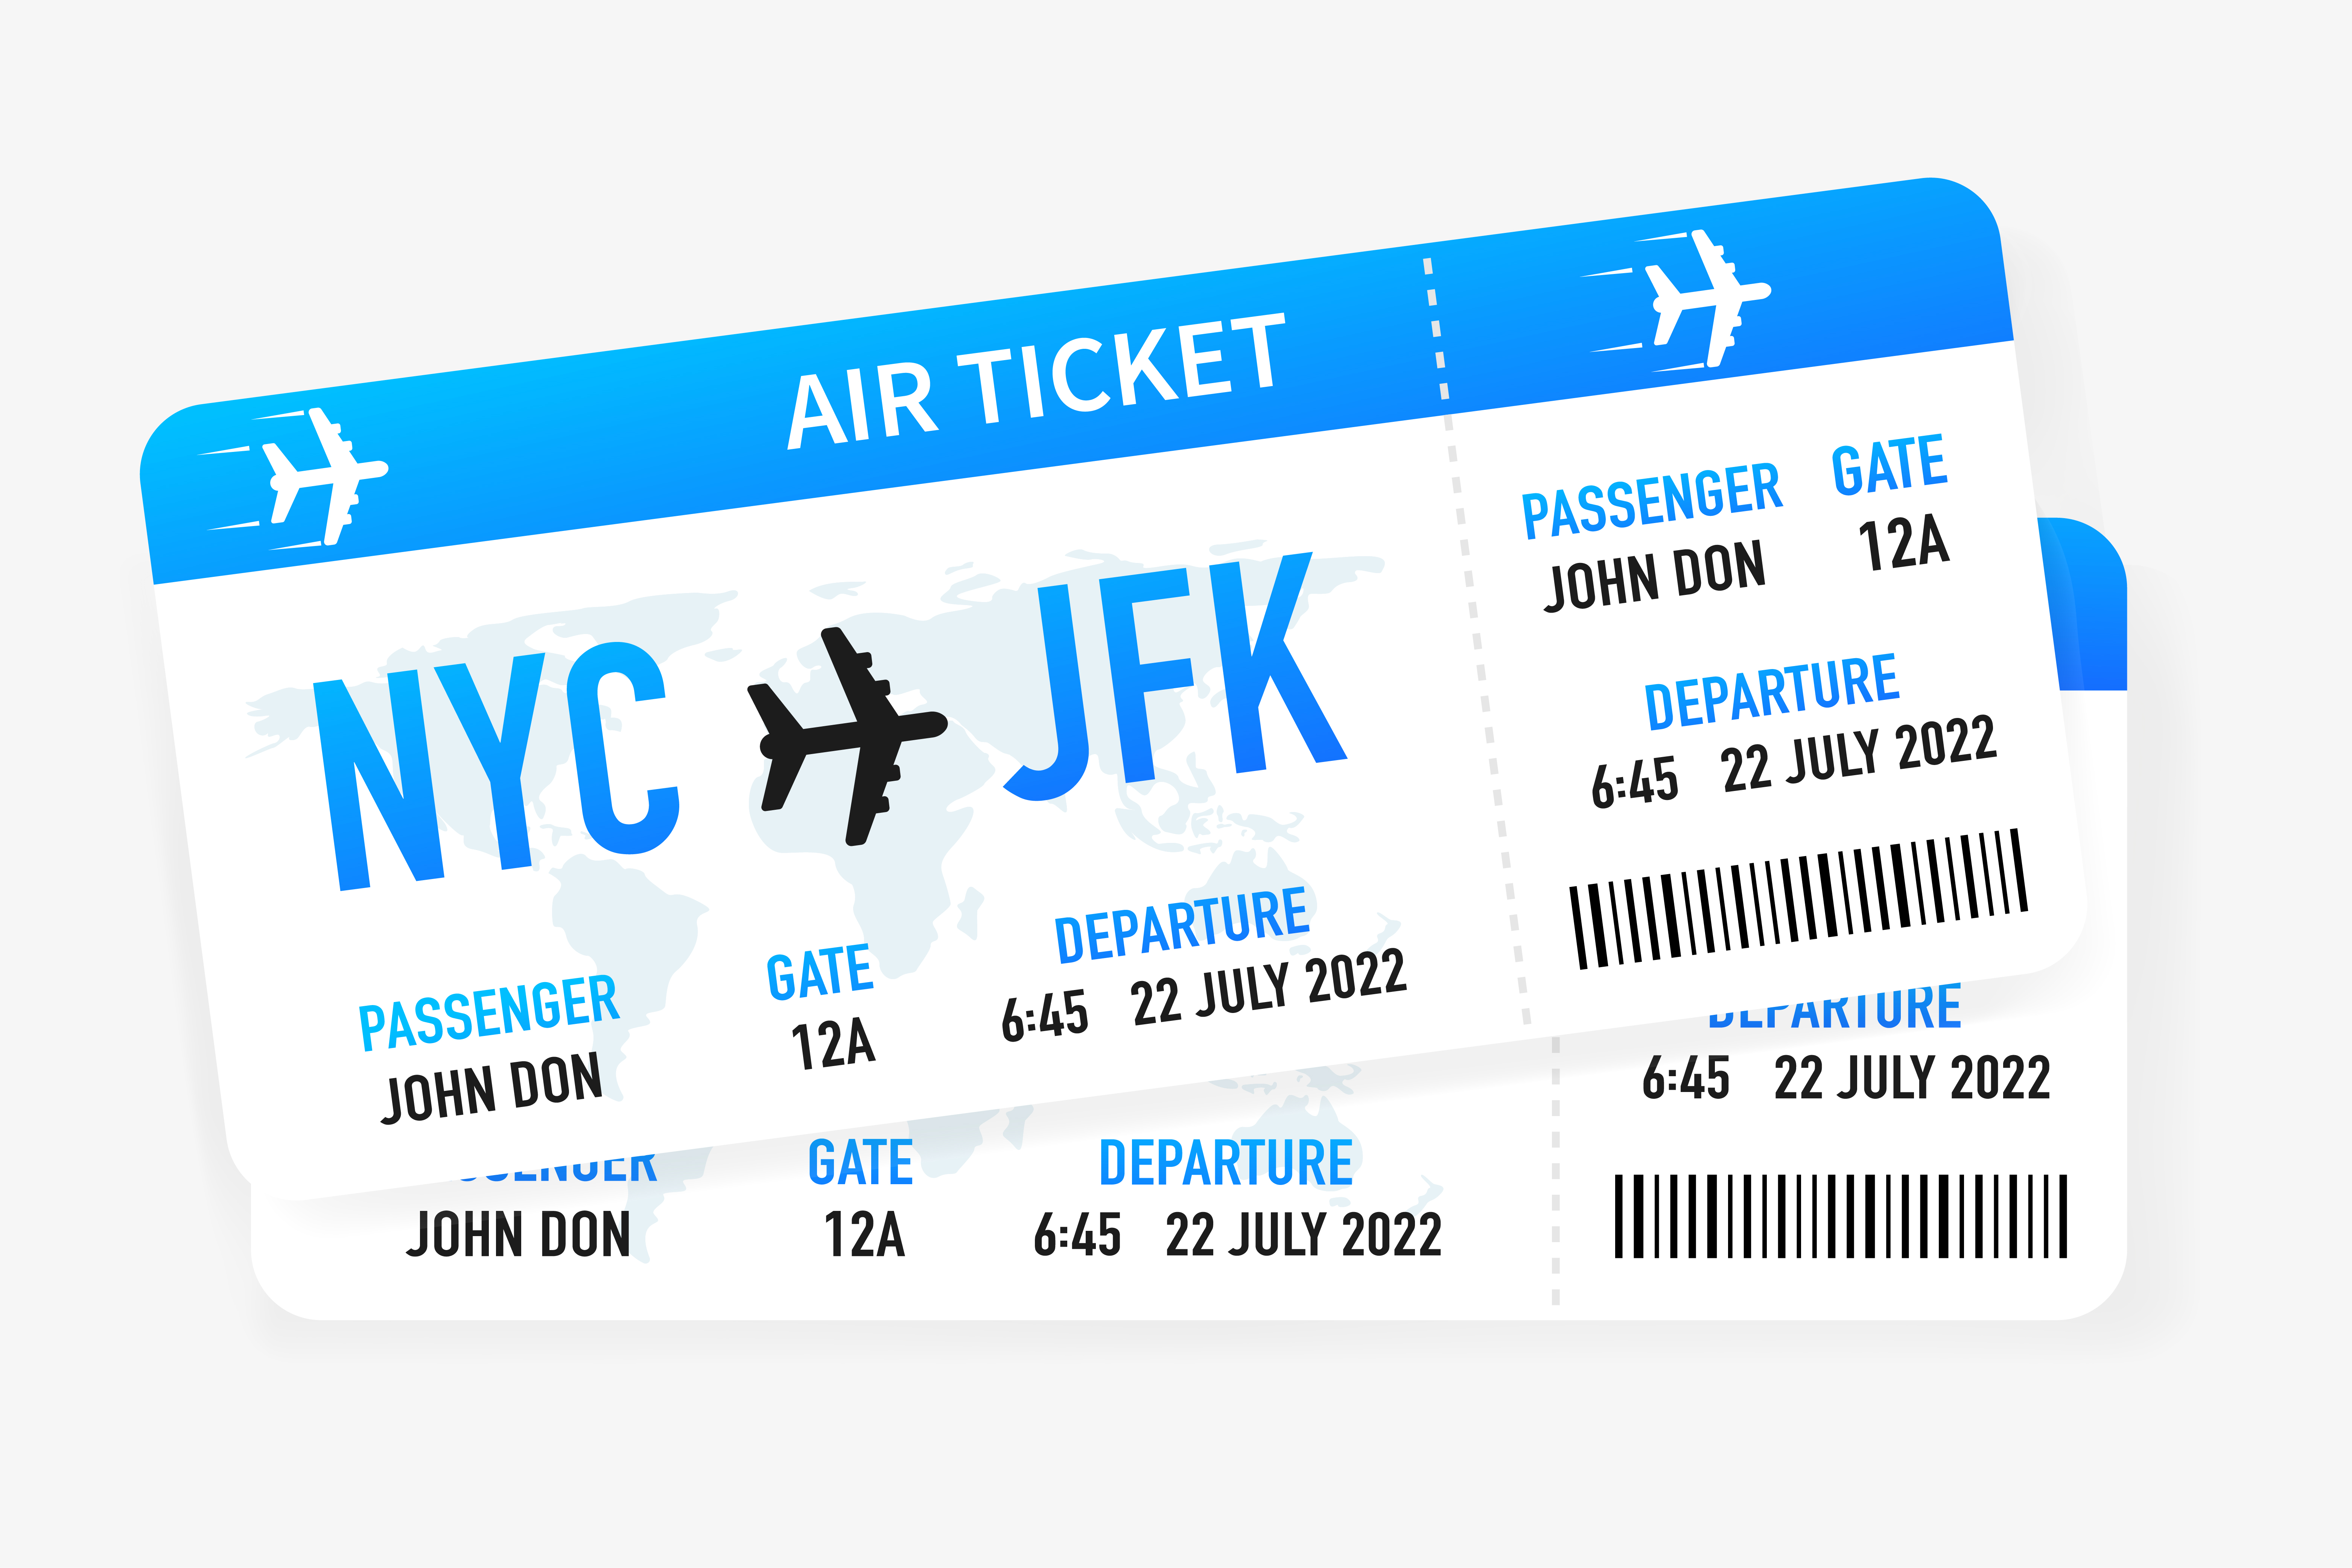 Mobile Boarding Pass: How Does an Electronic Boarding Pass Work? All Getaways